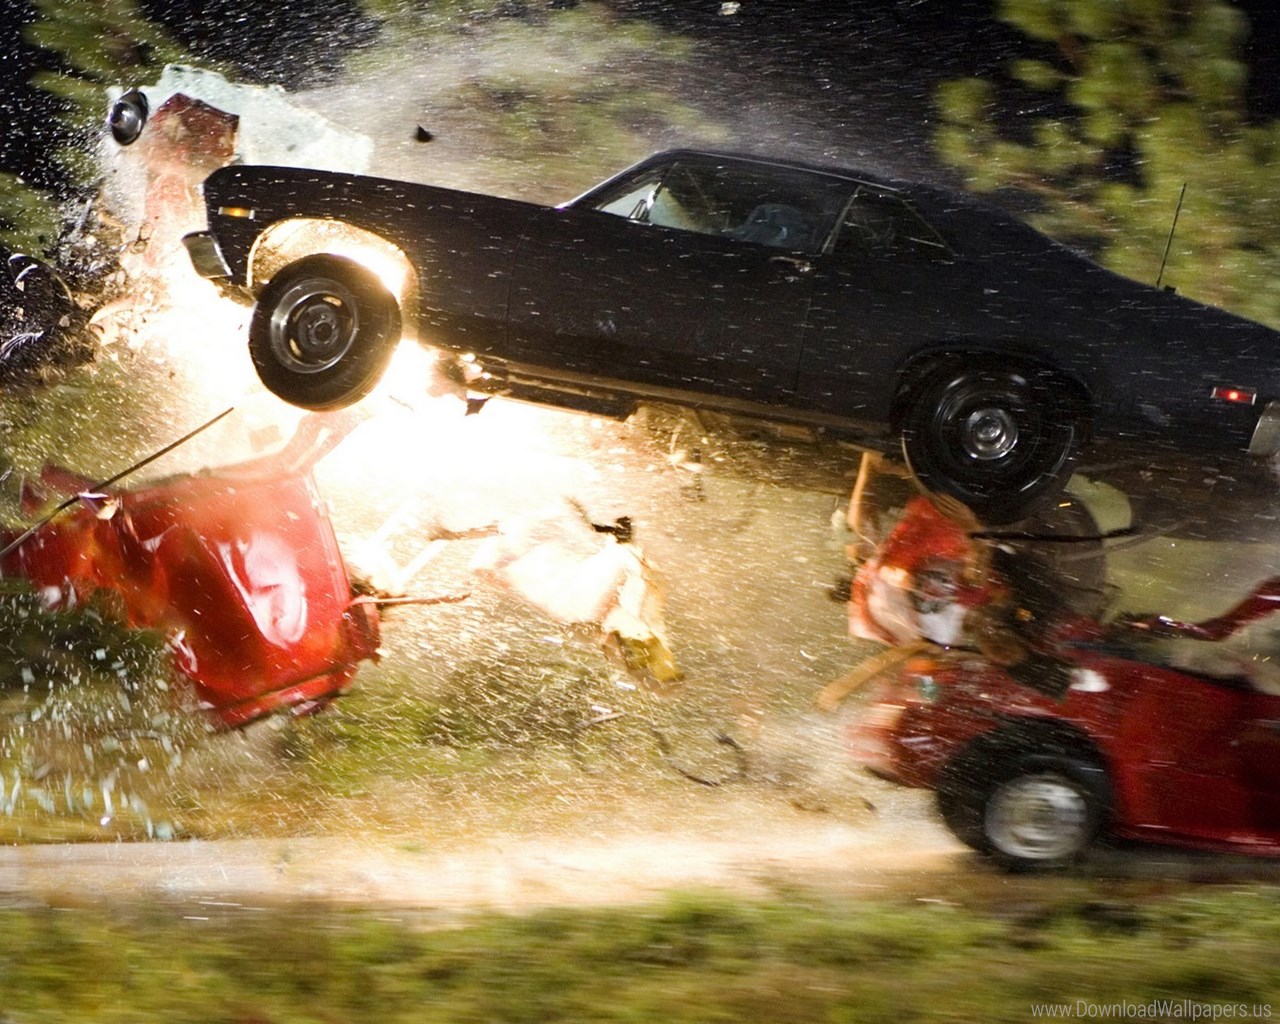 Download Standart - Car Accident In Movie , HD Wallpaper & Backgrounds